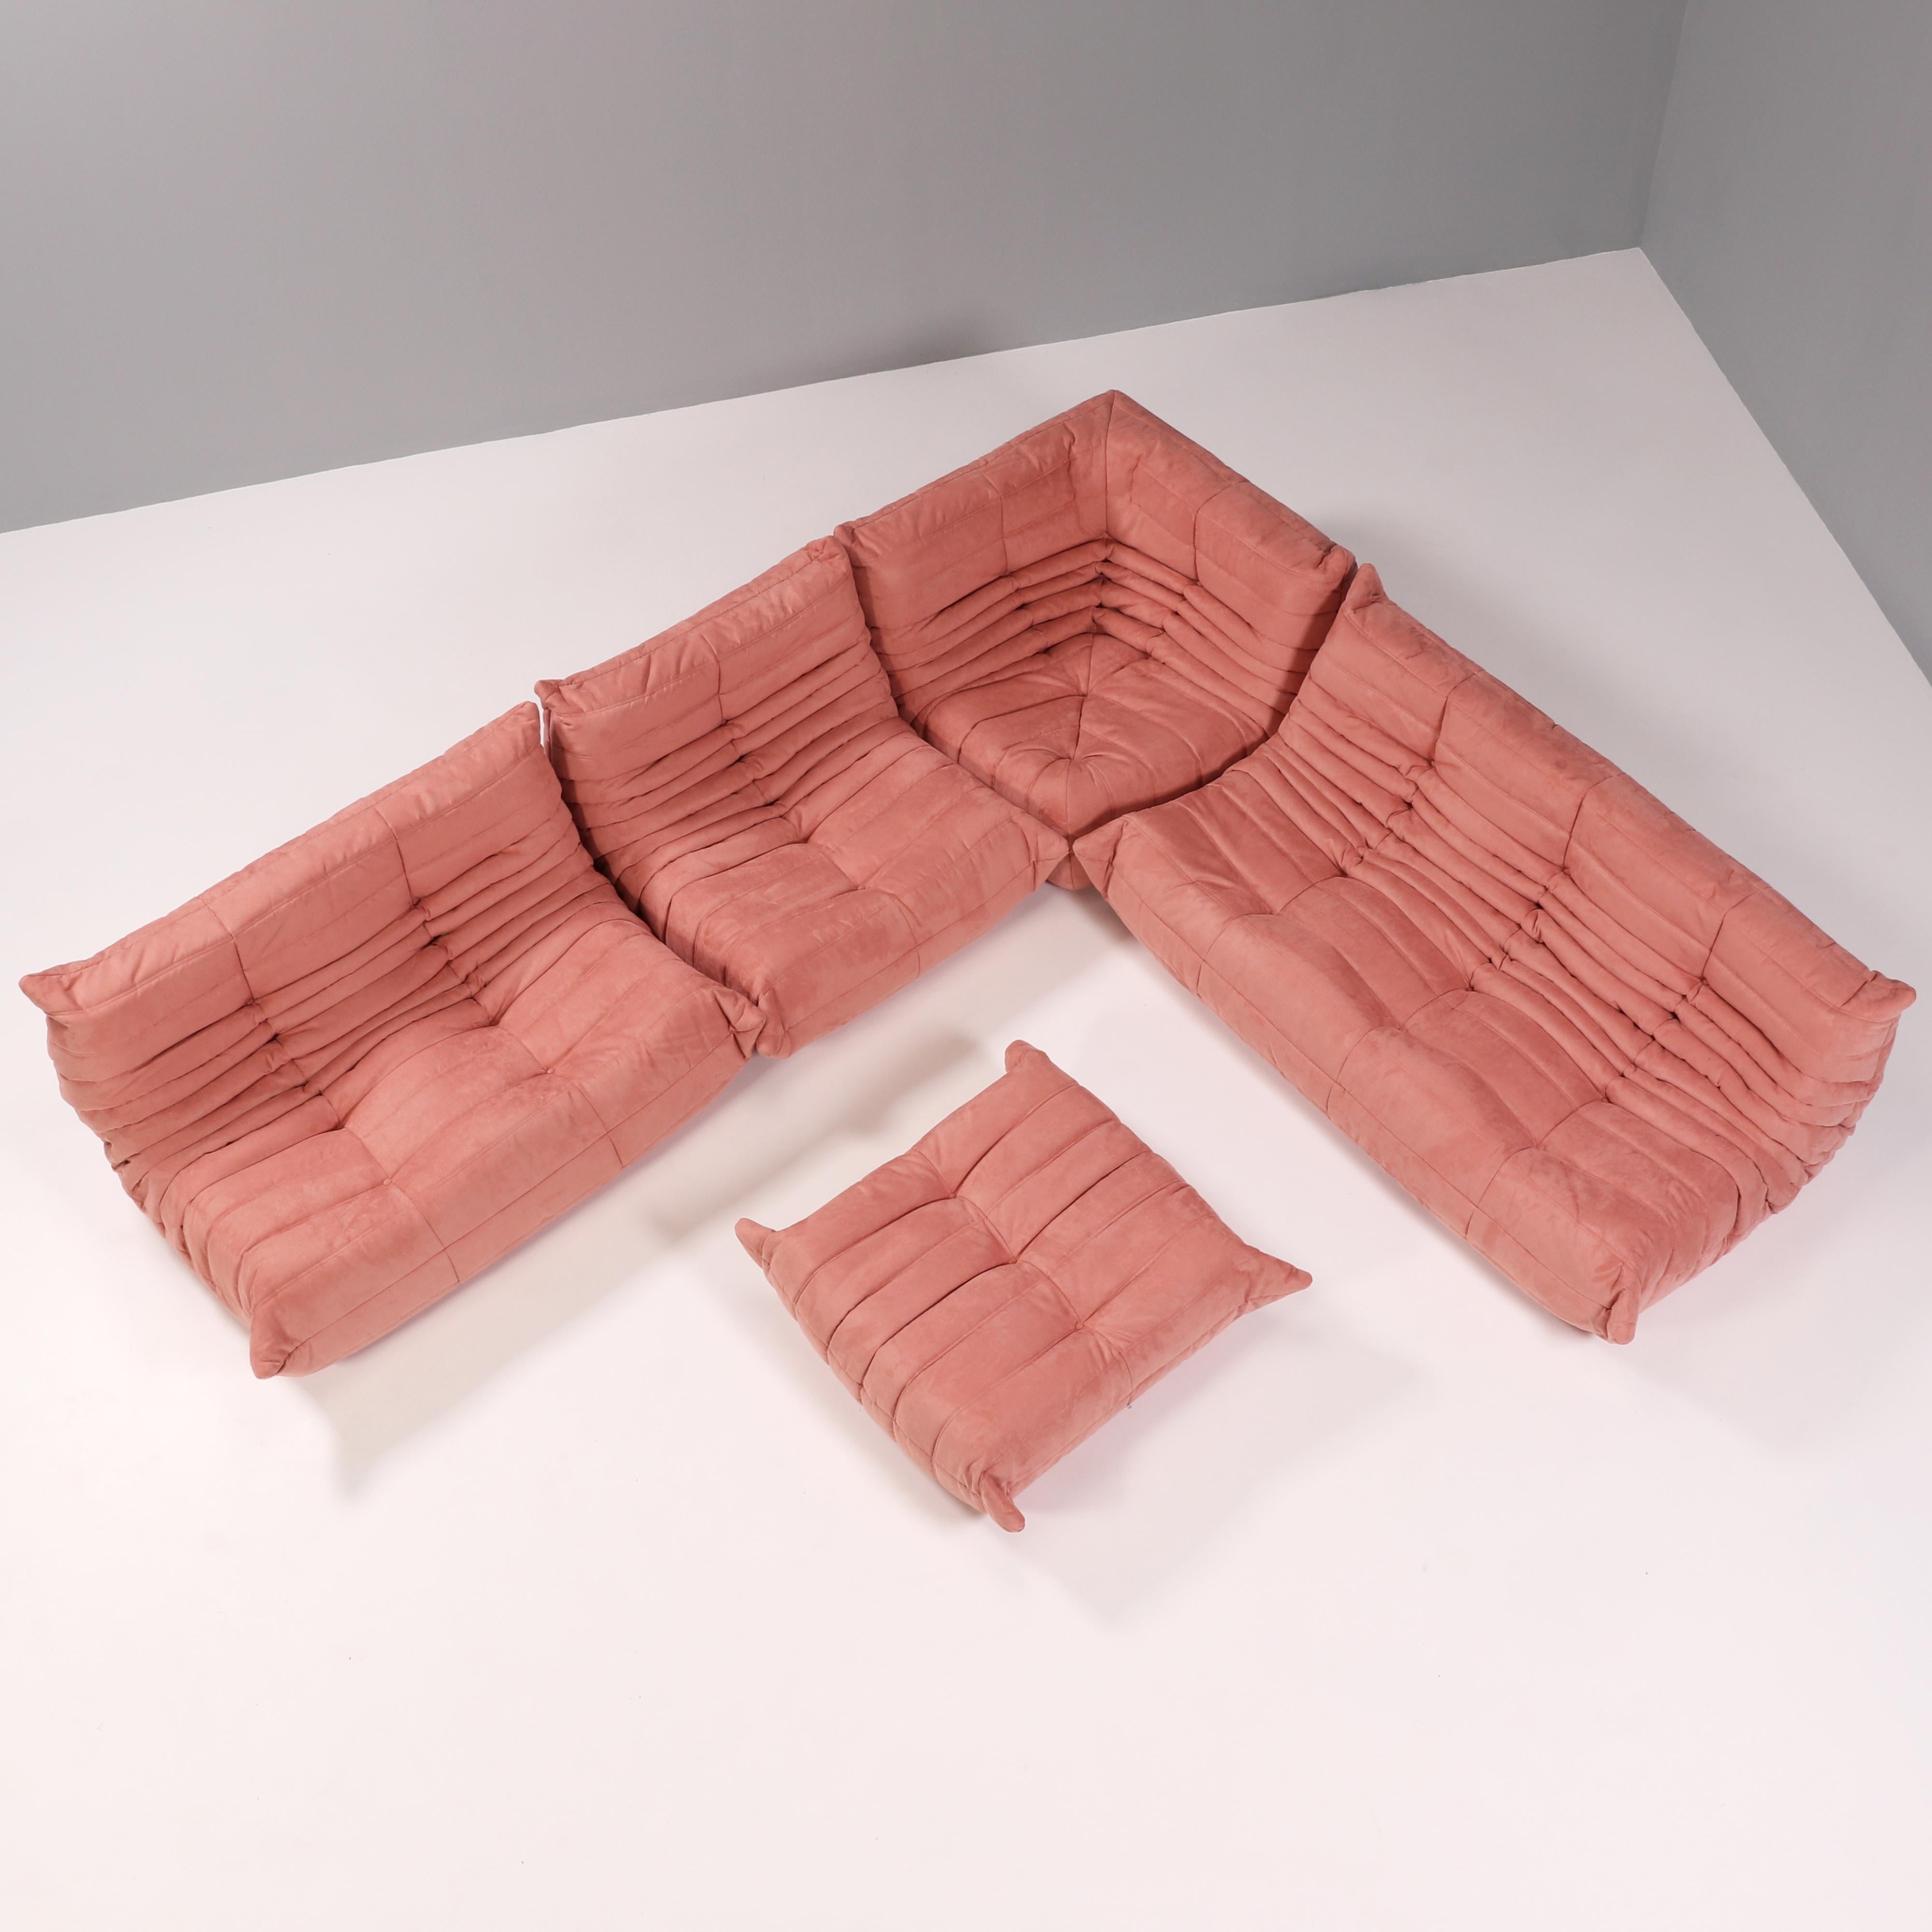 The iconic Togo sofa, originally designed by Michel Ducaroy for Ligne Roset in 1973 has become a design Classic.

This four-piece modular set (including 3 seater, 1 Seater, Corner & Footstool) - PLEASE NOTE 2 SEATER NOT INCLUDED AS IN PHOTO)  is